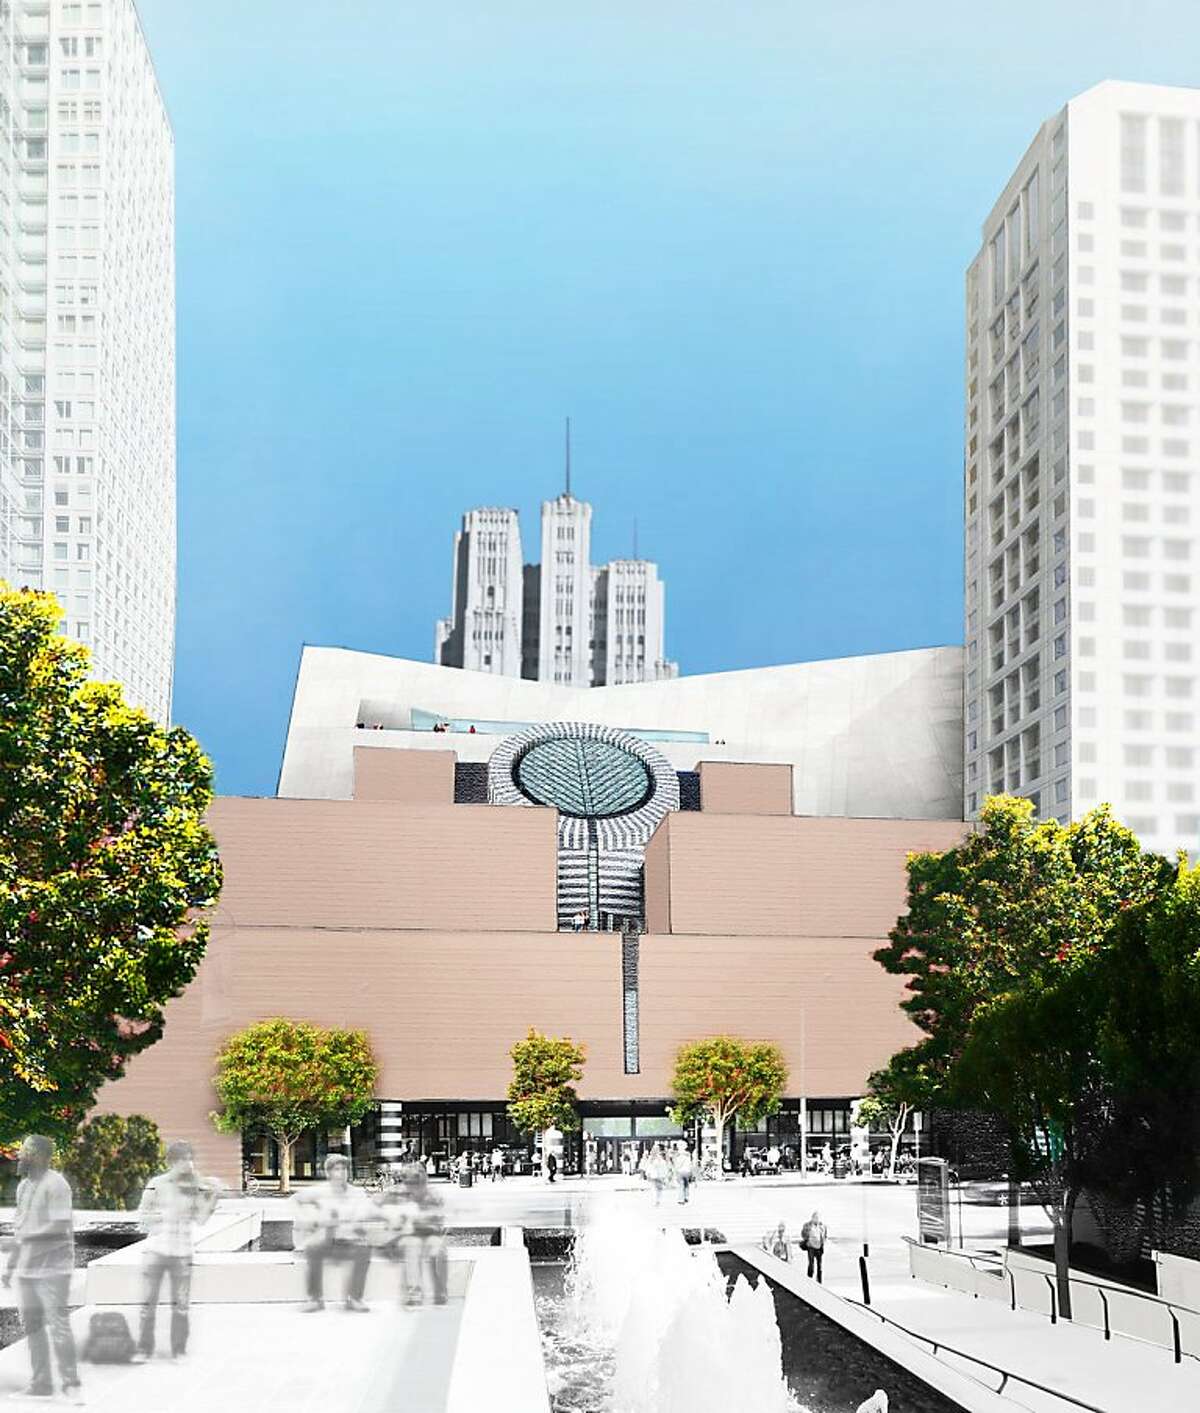 The design concept for the proposed expansion of SFMOMA features a bar of space that is 190 feet tall at Howard Street and 180 feet tall at Minna Street, but tapers down or inward at points to preserve views and sunlight as much as possible. It would also have sculpture terraces along its surface. Ran on: 05-26-2011 The concept features a bar of space that is 190 feet tall at Howard Street and 180 feet tall at Minna Street. Ran on: 05-26-2011 The concept features a bar of space that is 190 feet tall at Howard Street and 180 feet tall at Minna Street. Ran on: 05-26-2011 The architects plans take a deferential approach to the museums neighbors by lessening the impact on views.